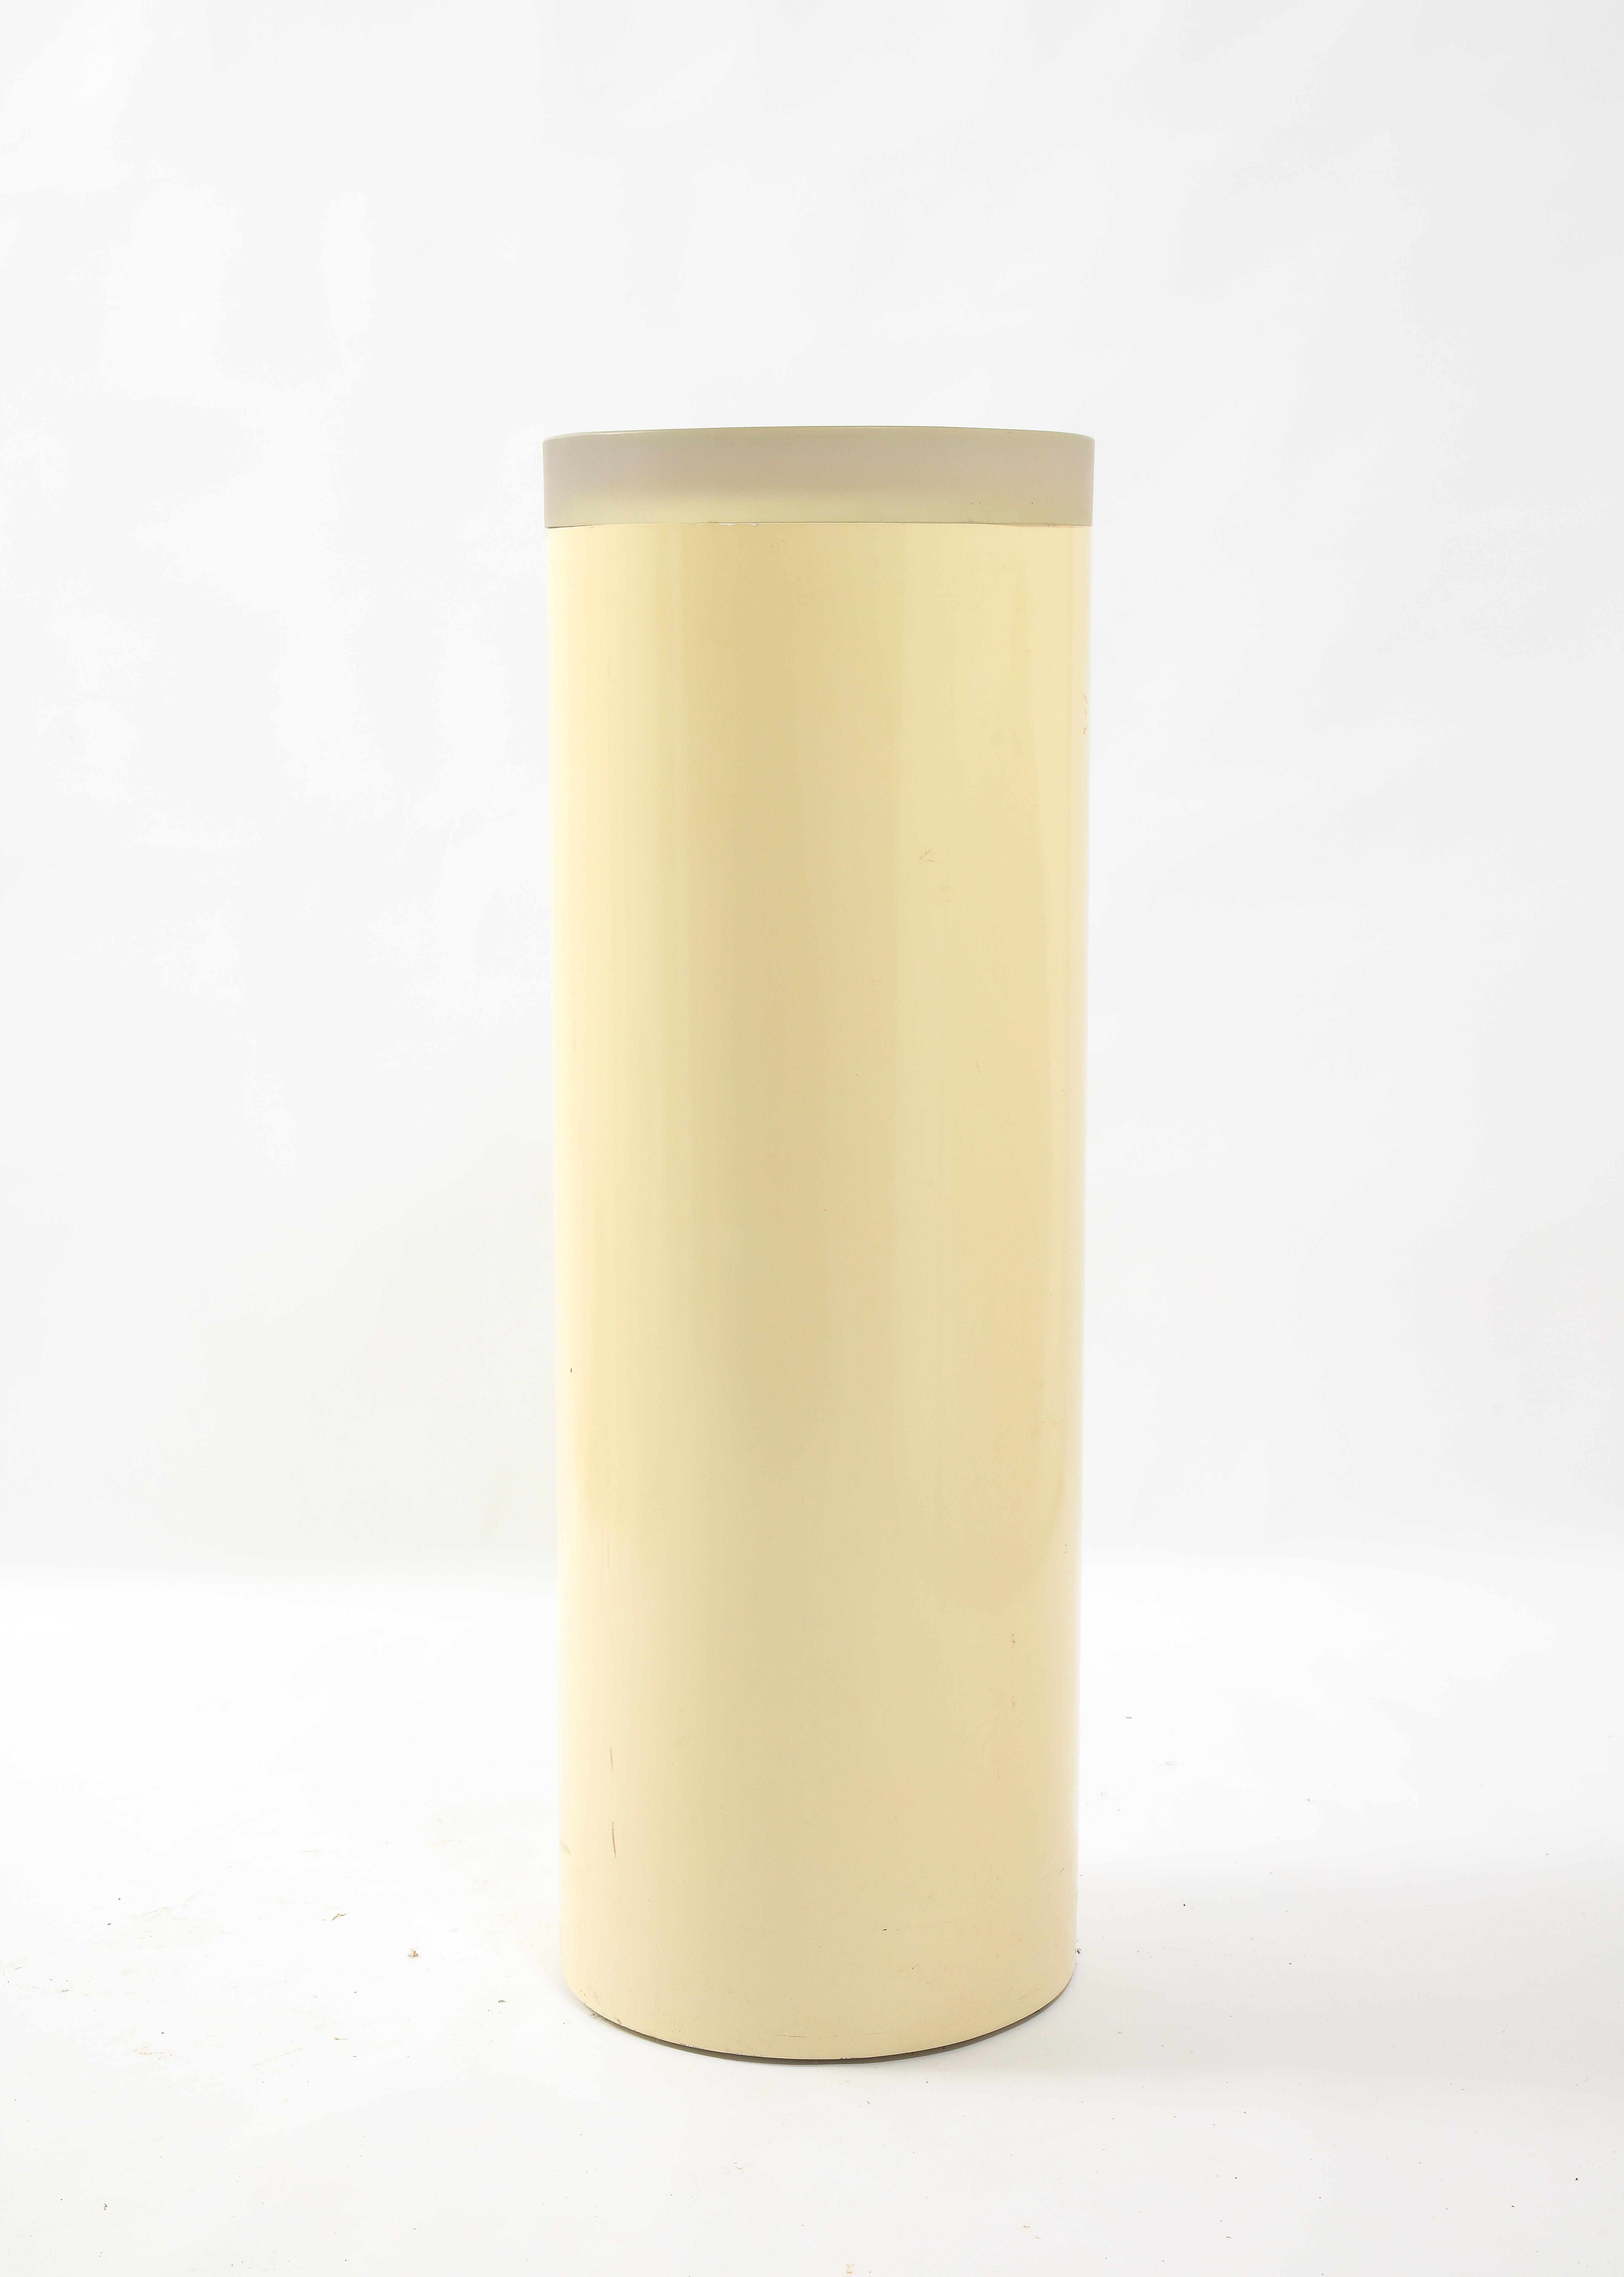 Cast Resin & Acrylic Lighted Pedestal, USA 1970's In Good Condition For Sale In New York, NY